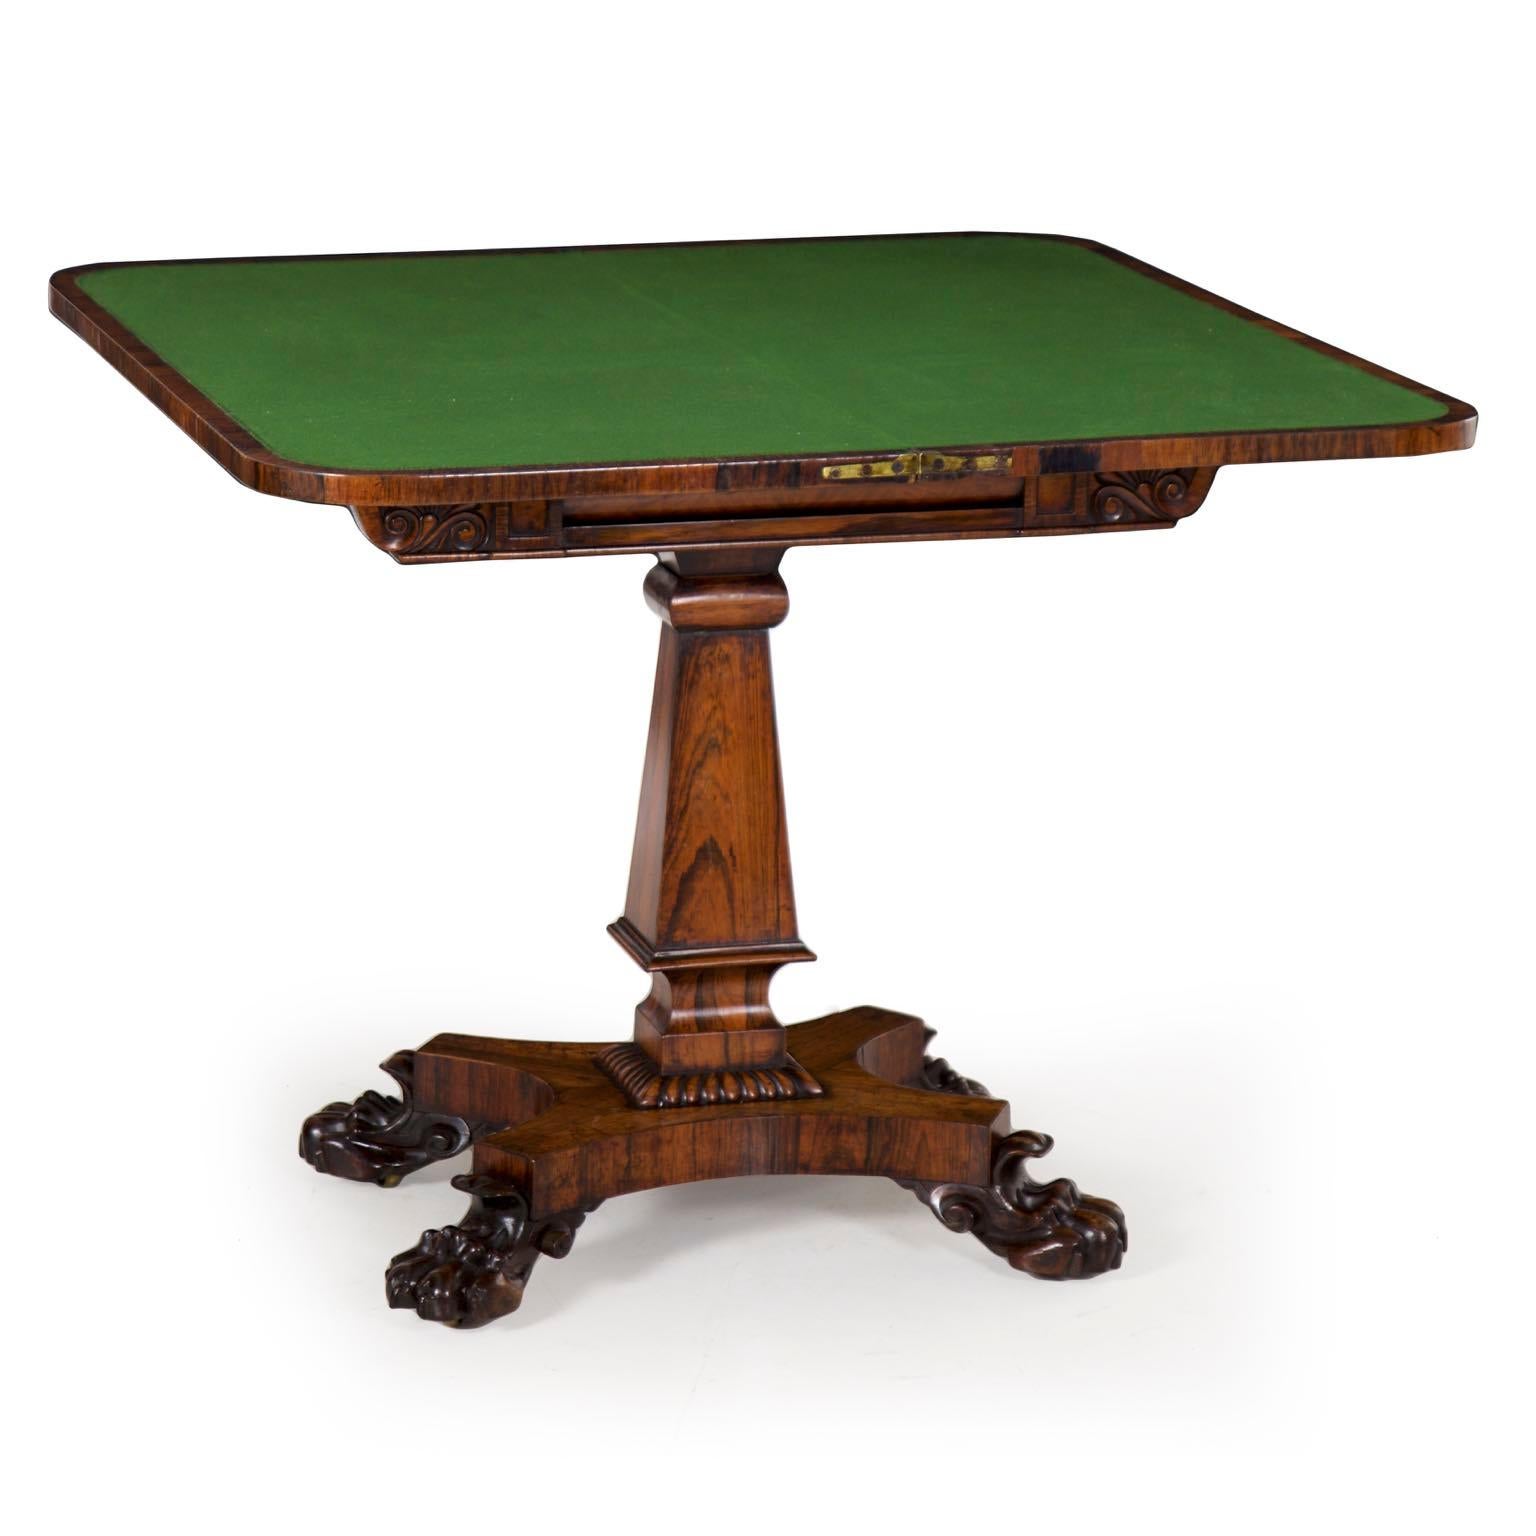 An exceptional and unusual card playing table from the second quarter of the 19th century, this very fine presentation piece is dressed in beautifully patinated rosewood veneers throughout. The chaotic grain is full of drama and movement, this